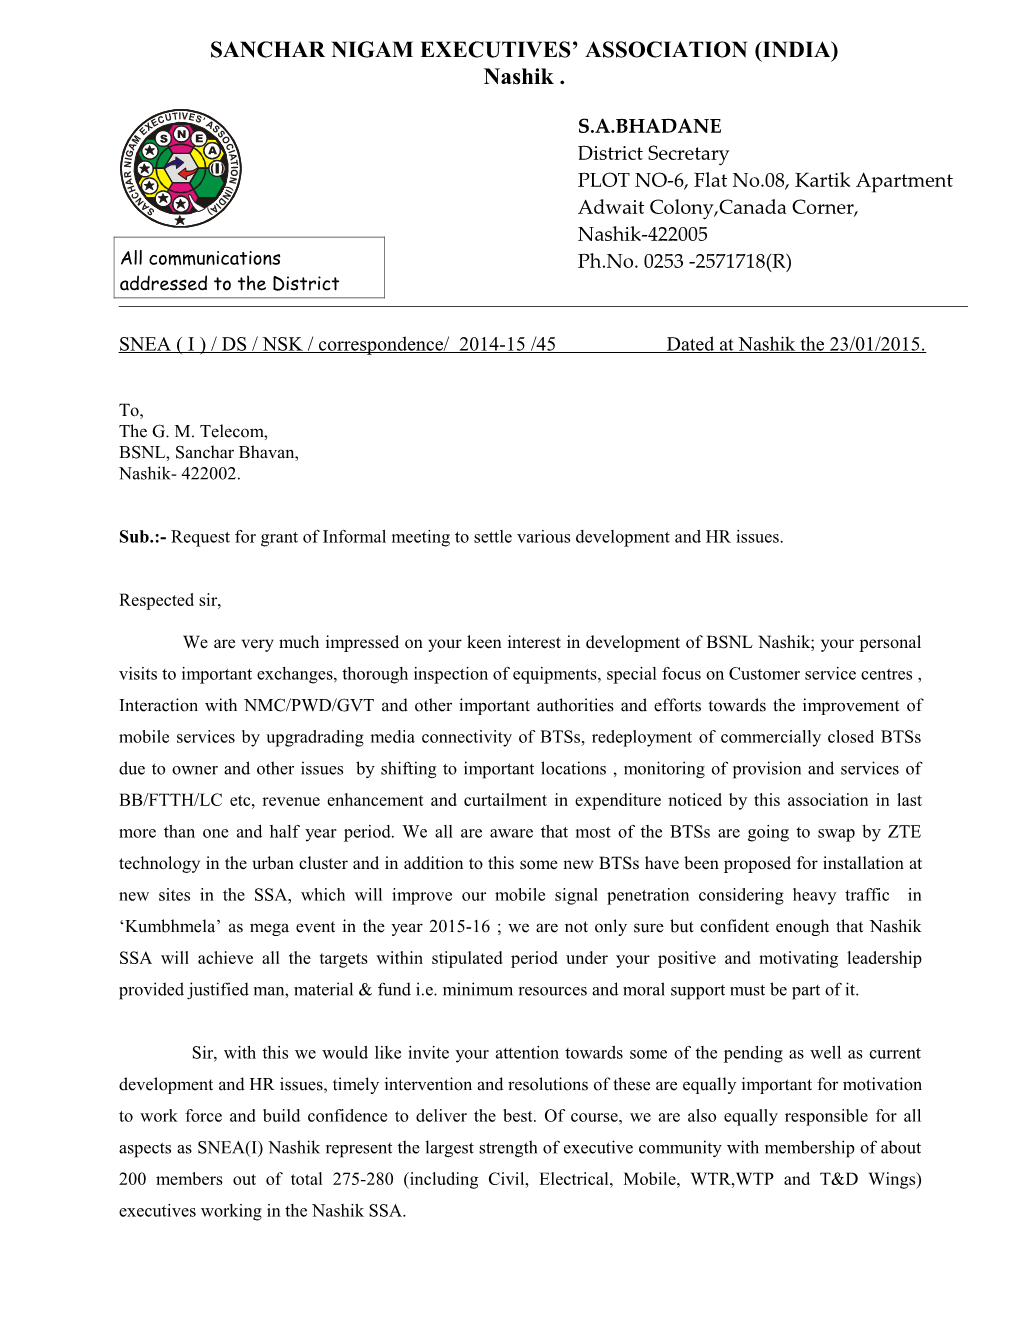 SNEA( I ) / DS / NSK/ Correspondence/ 2014-15 /45 Dated at Nashik the 23/01/2015